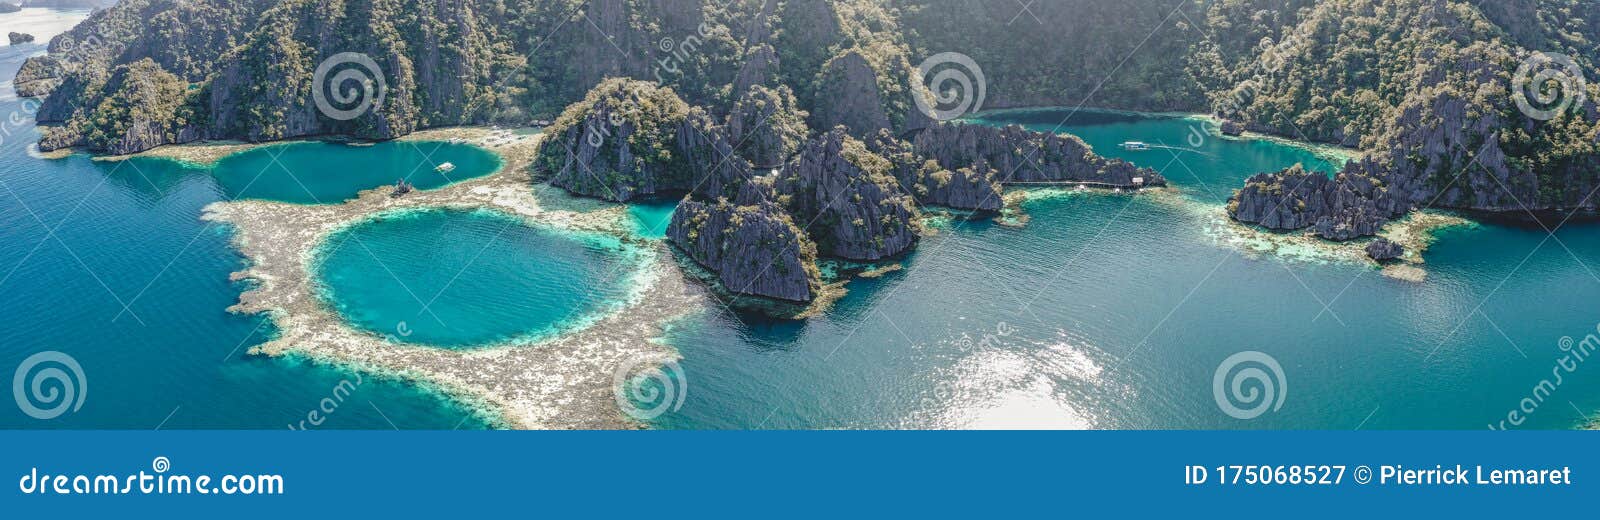 aerial view of the twin lagoon in coron island, palawan, philippines